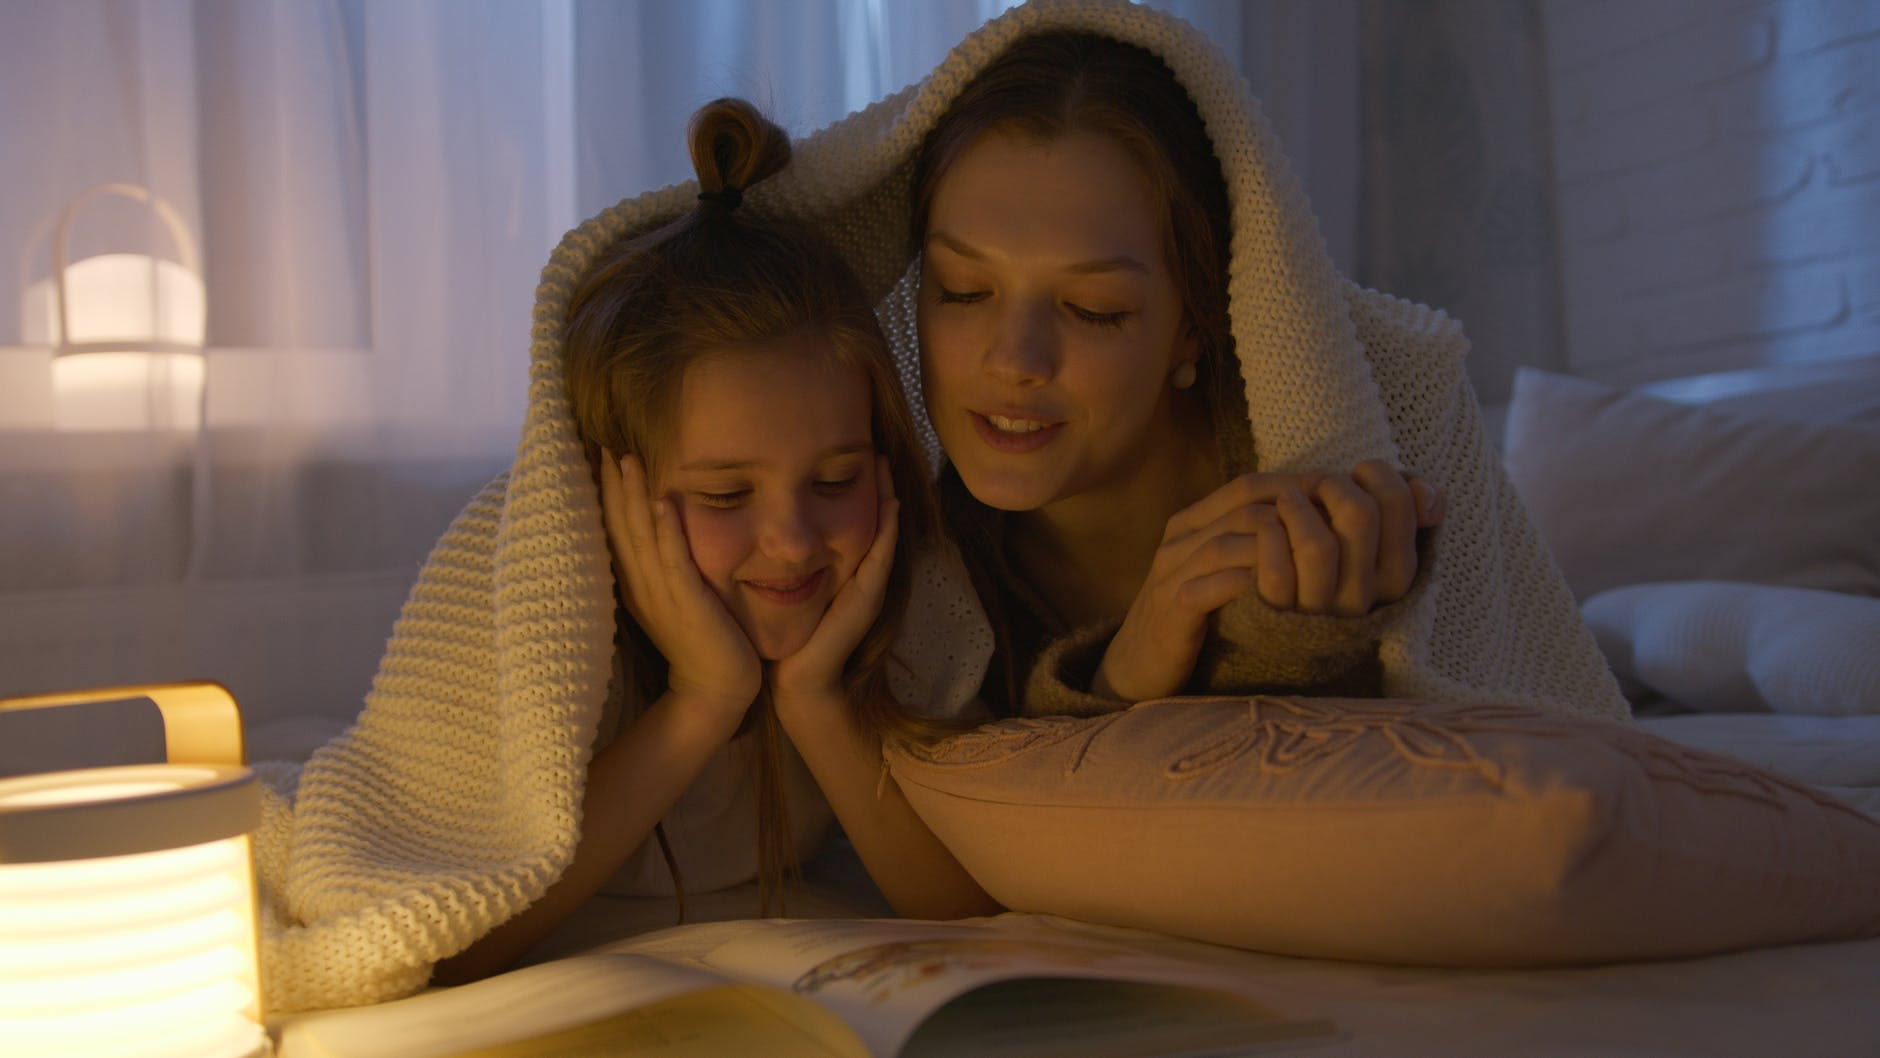 How Bedtime Stories Foster Strong Family Bonds